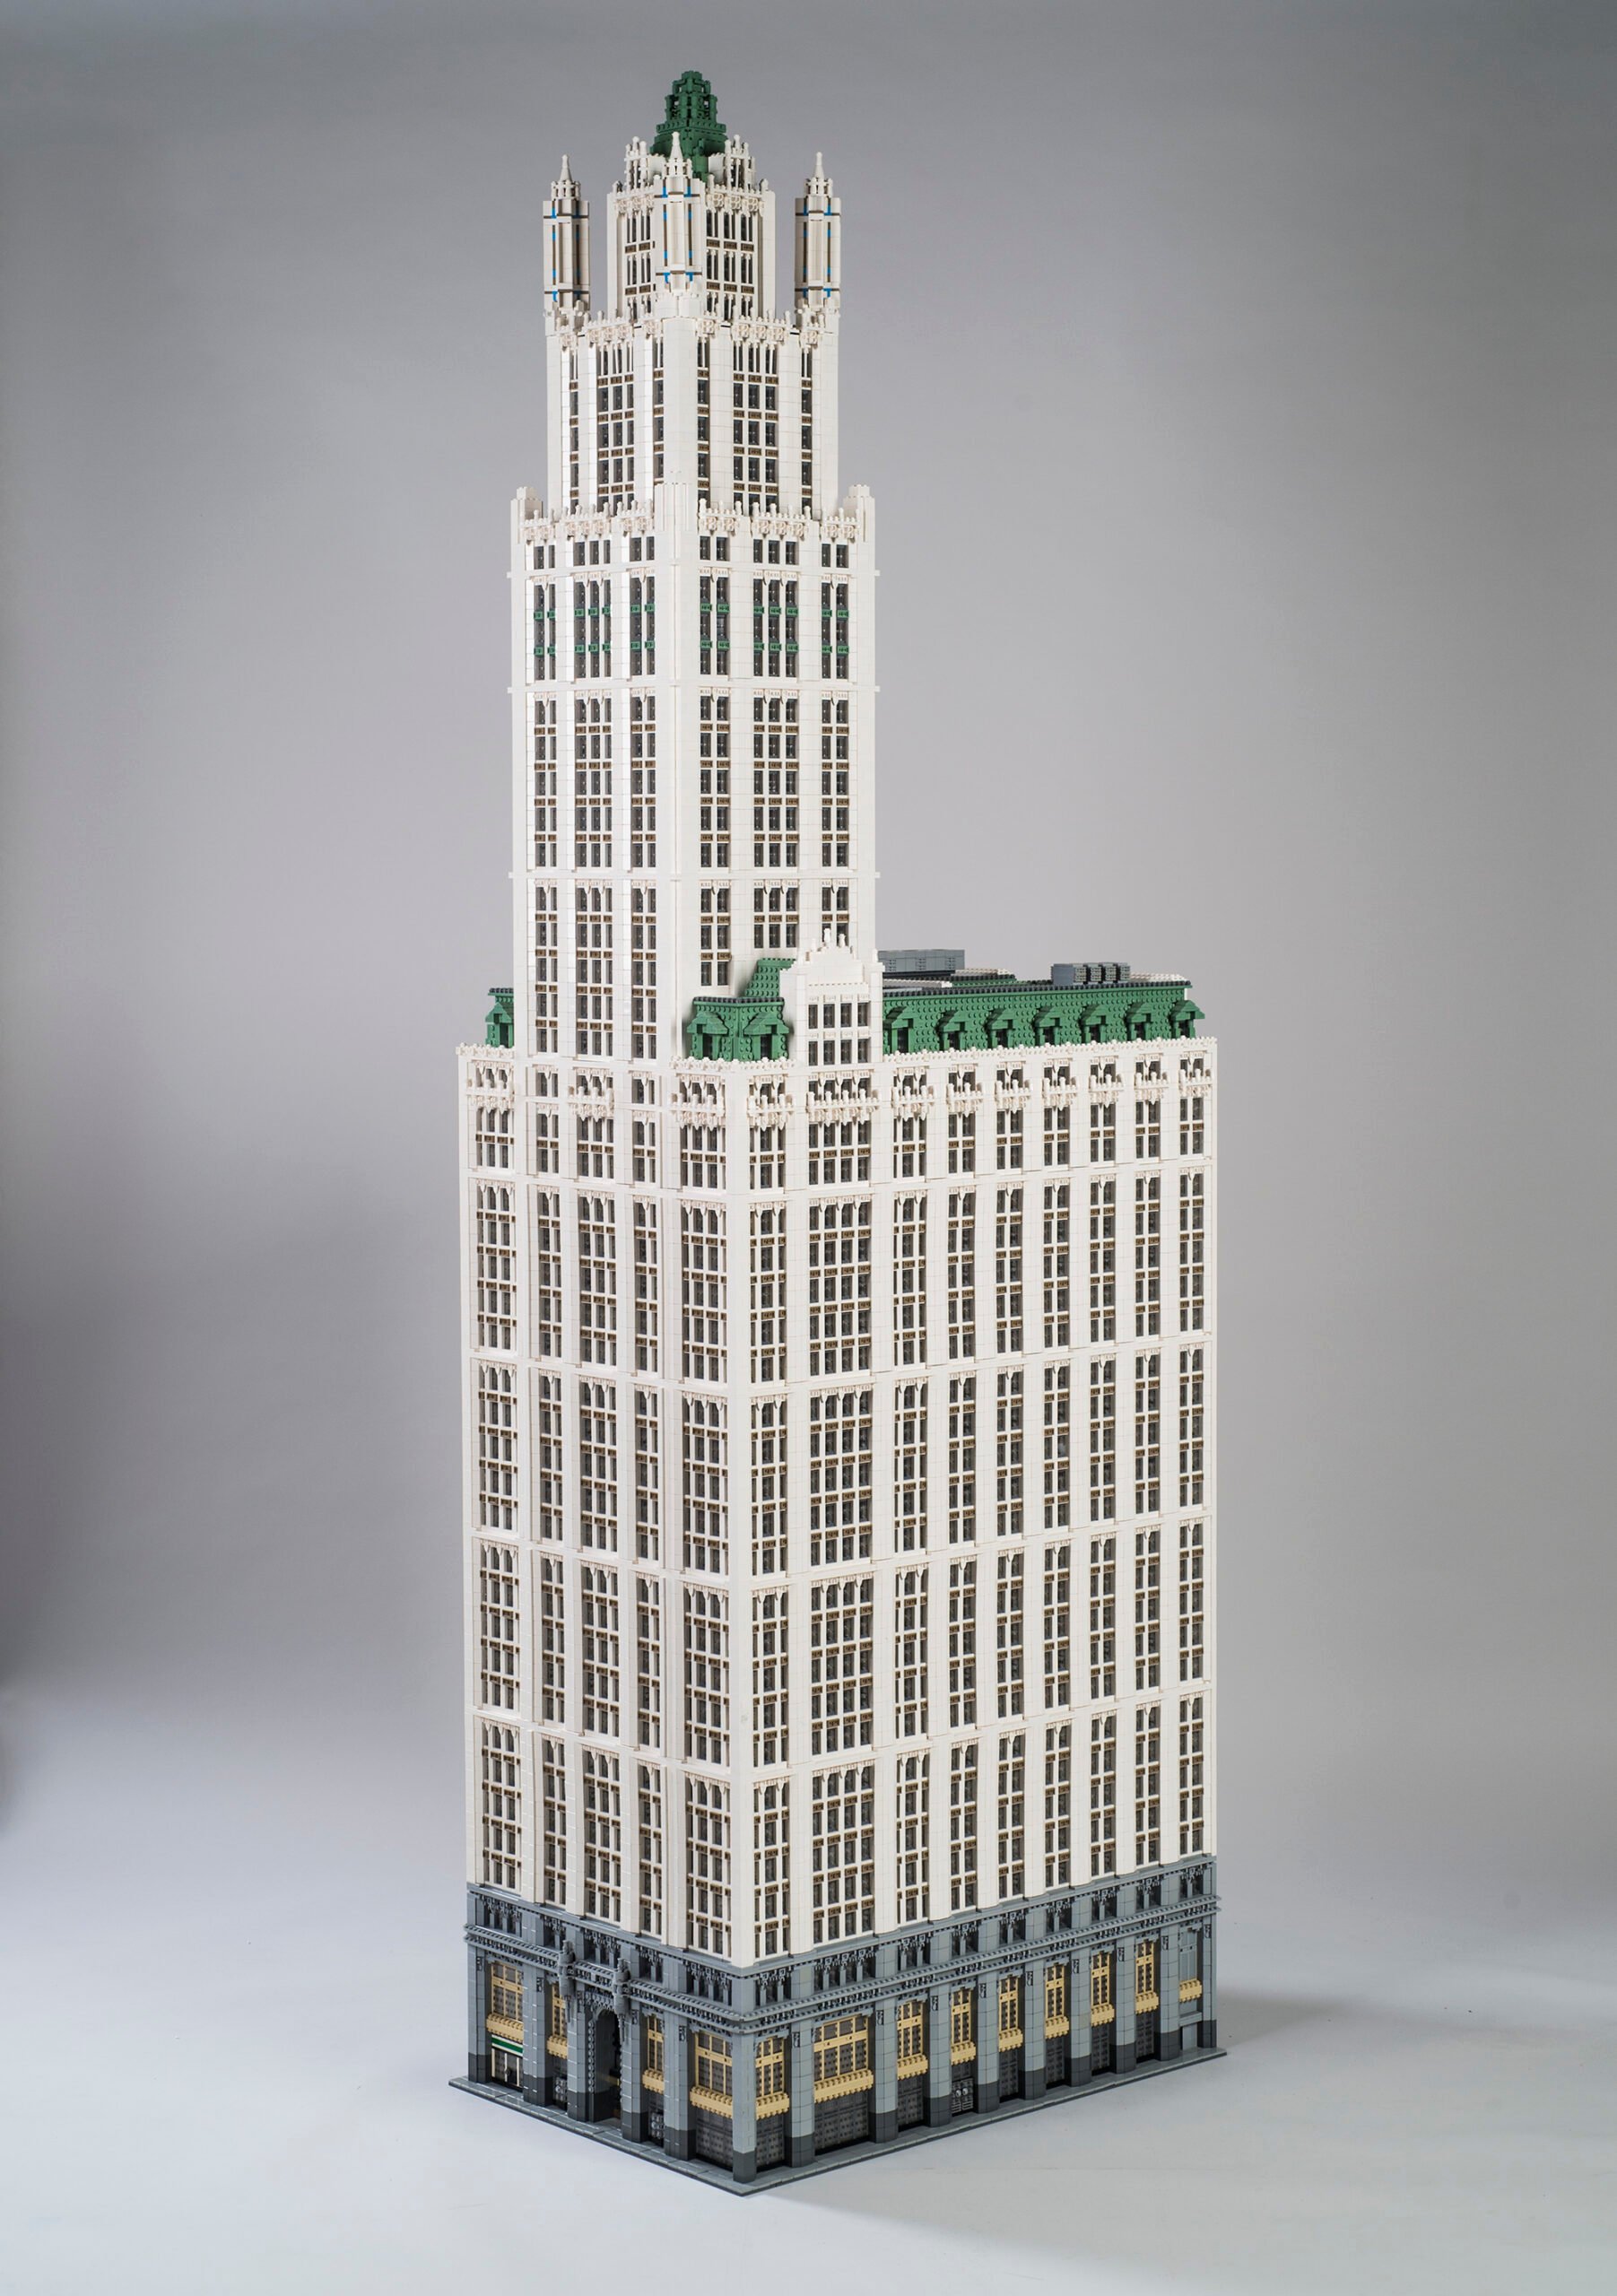 The iconic Woolworth building, created by Jonathan Lopes, shot by Bryan Regan